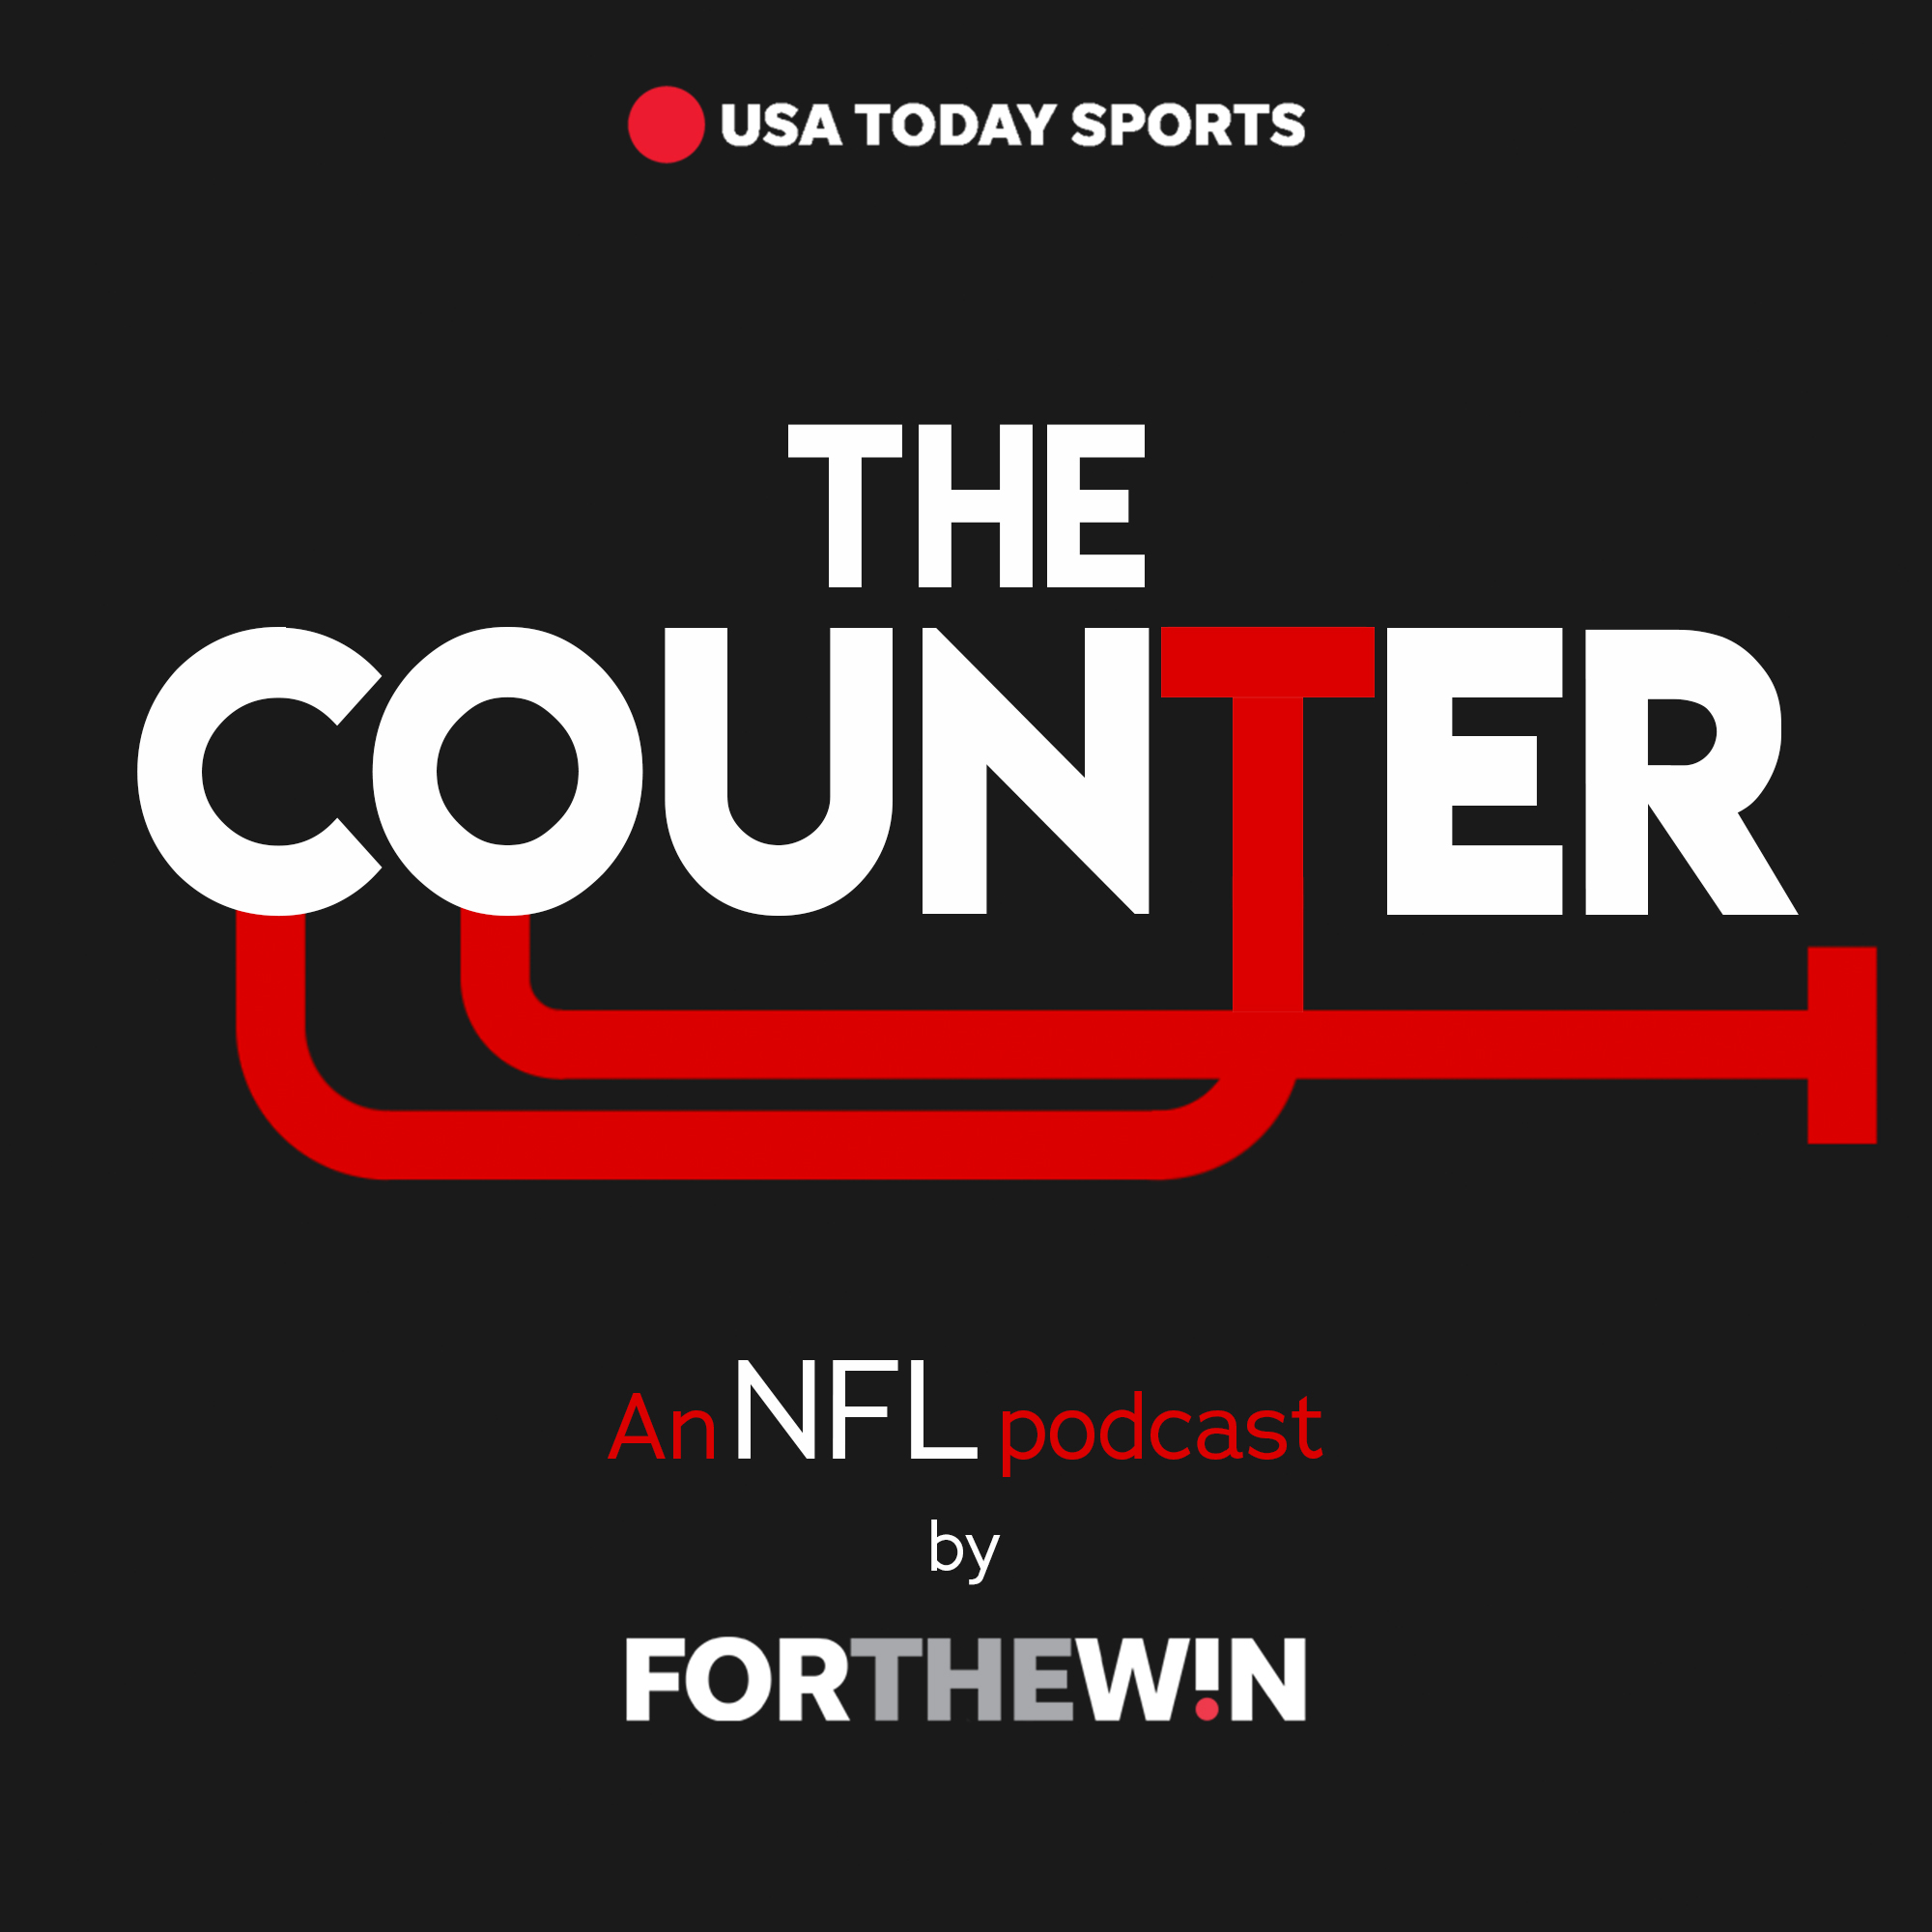 The Counter: An NFL Podcast by For The Win - NFL Botches Covid Response, Playoff Picture Update, Plus Week 14 Analysis